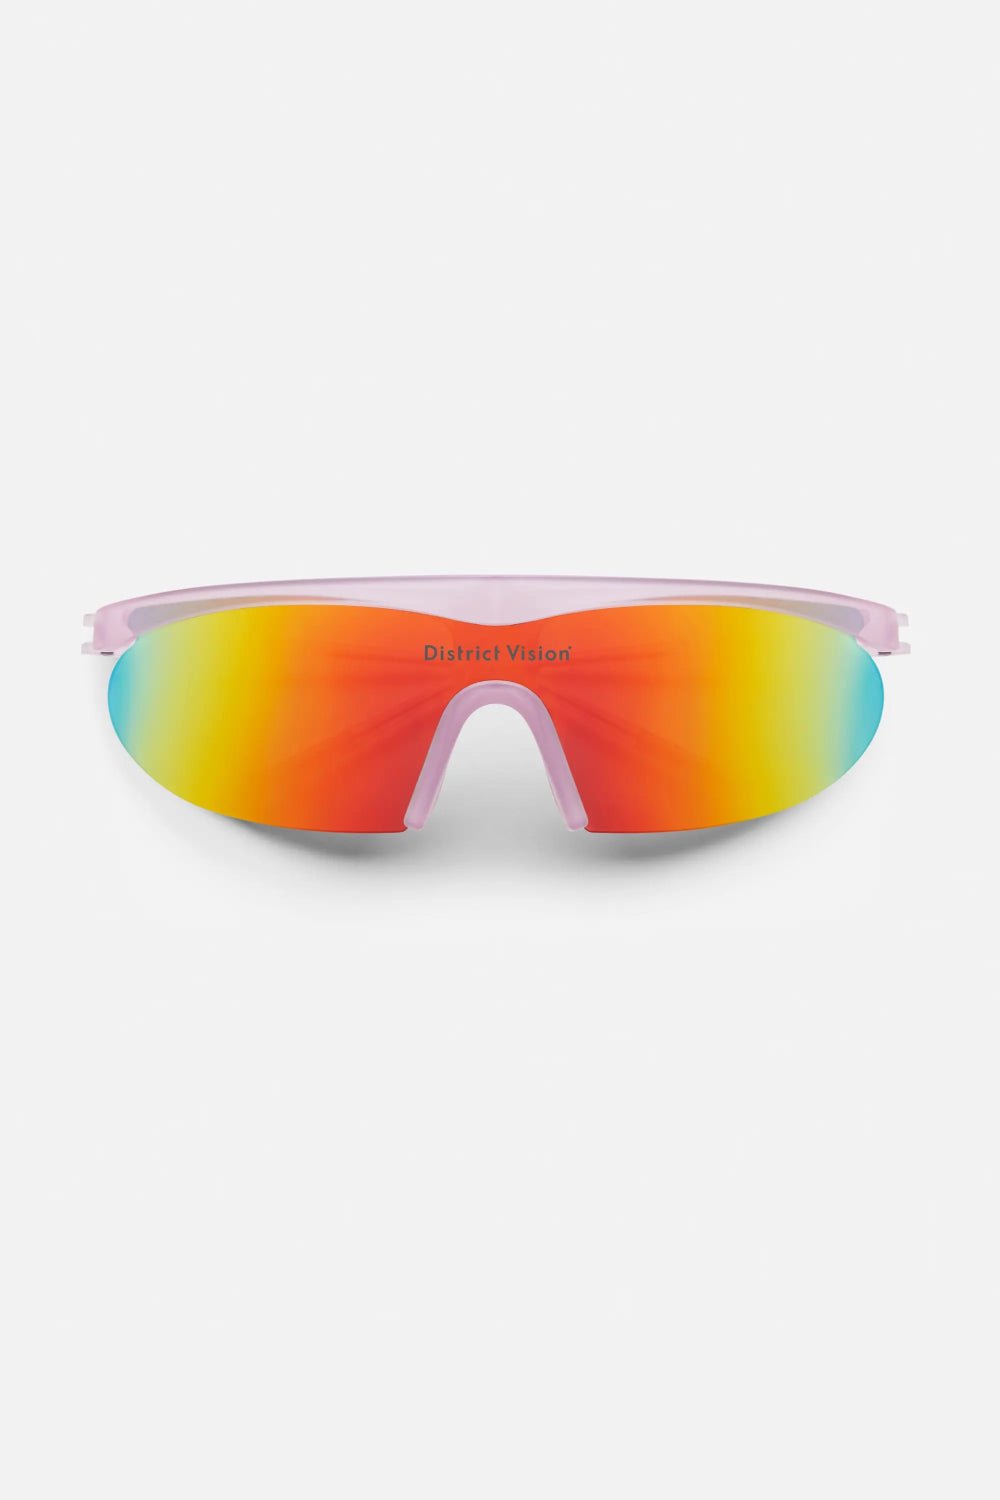 District Vision Koharu Eclipse Sunglasses - Pink Moon/D+ Spectral Mirror | Coffee Outdoors